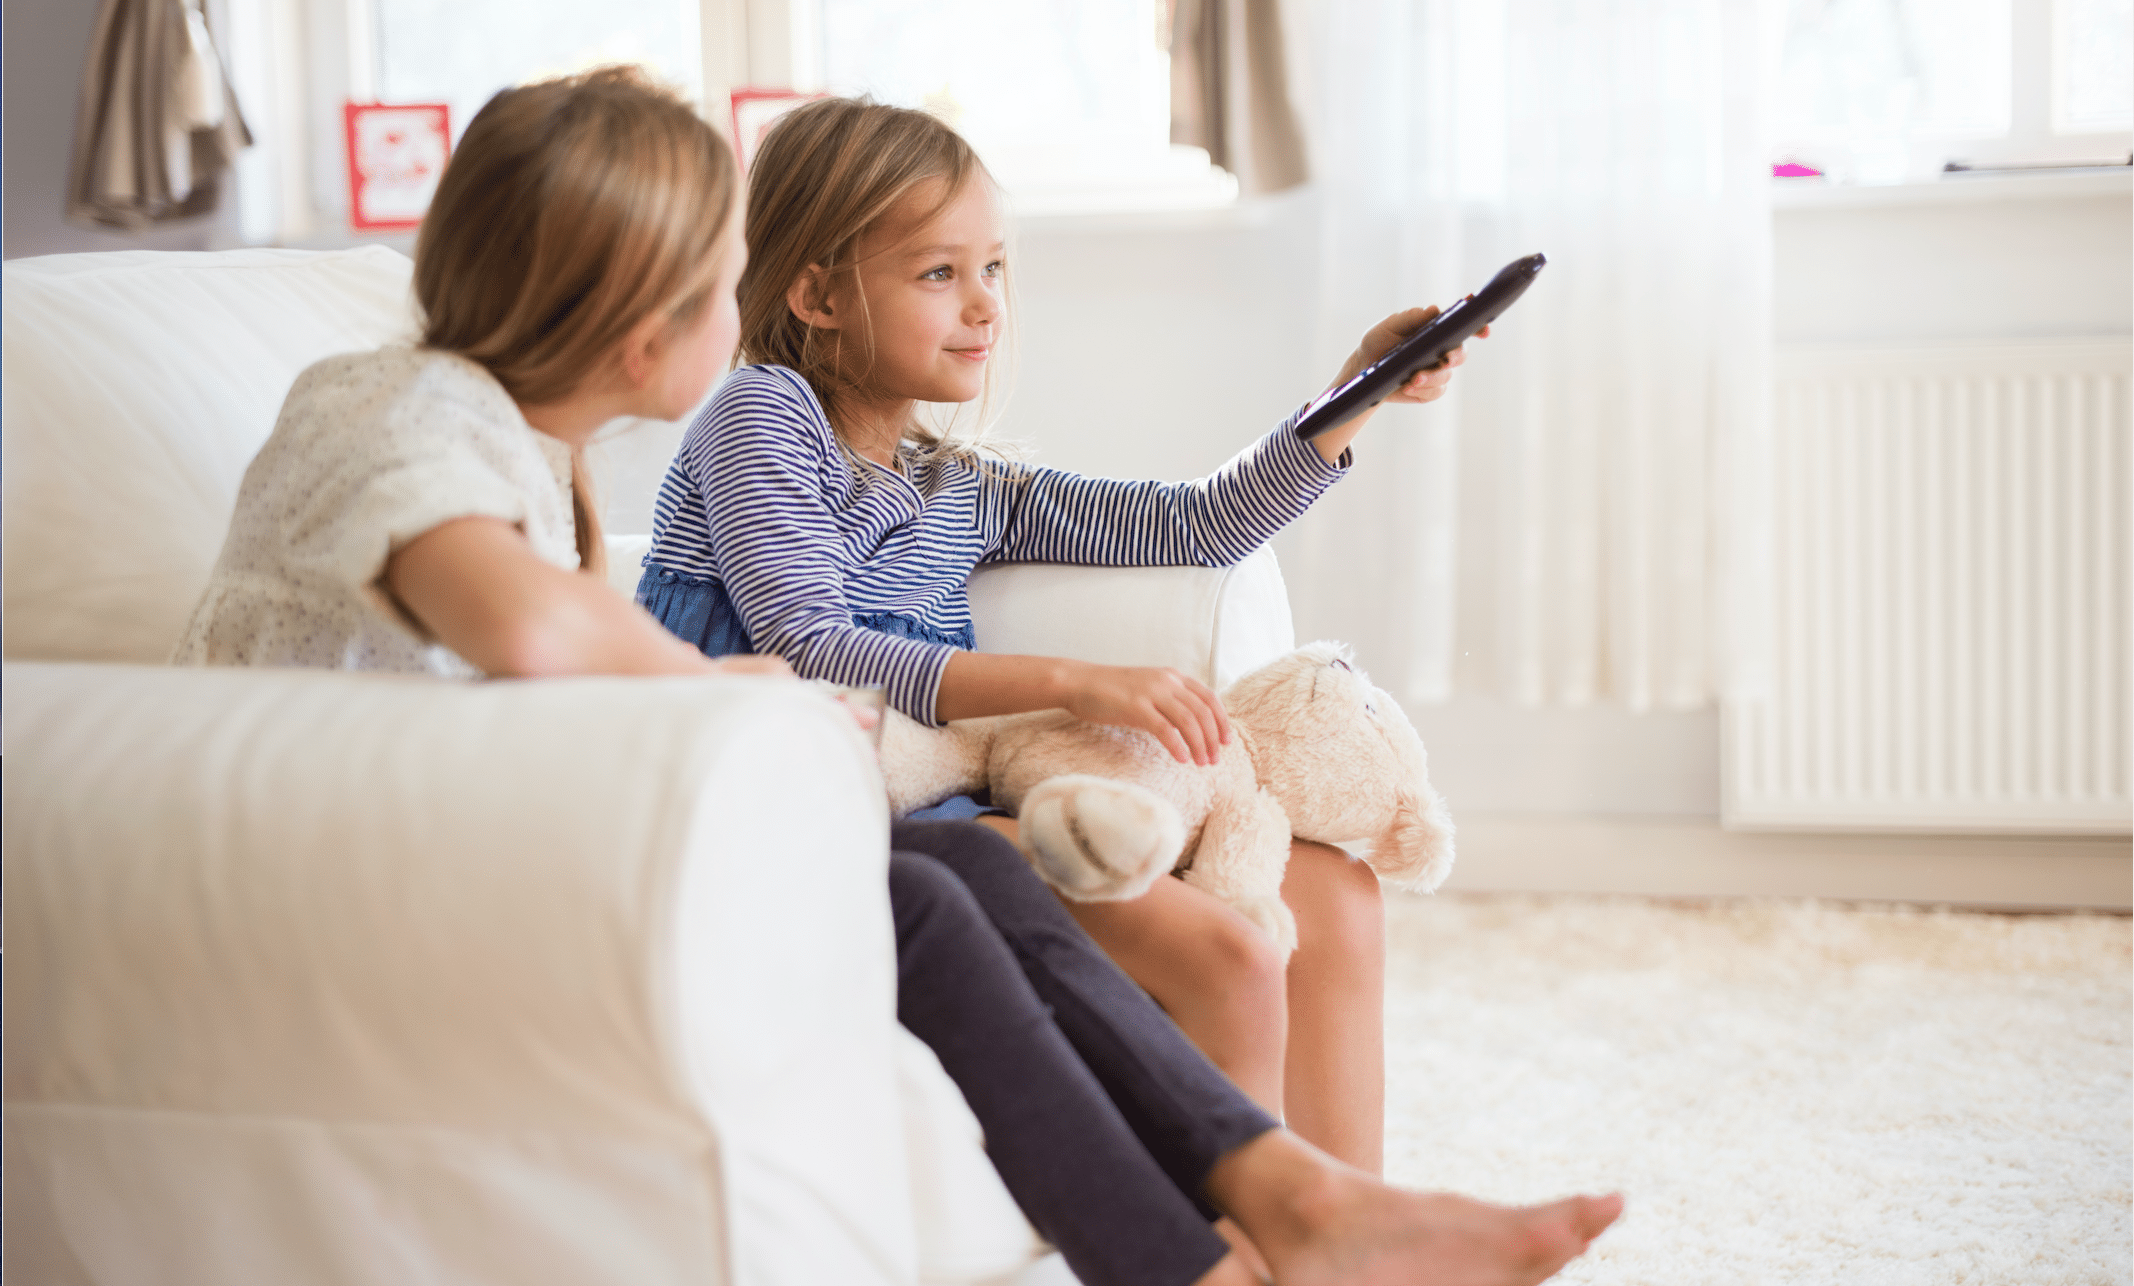 5 Steps to Reduce Screen Time Without Tears or Yelling